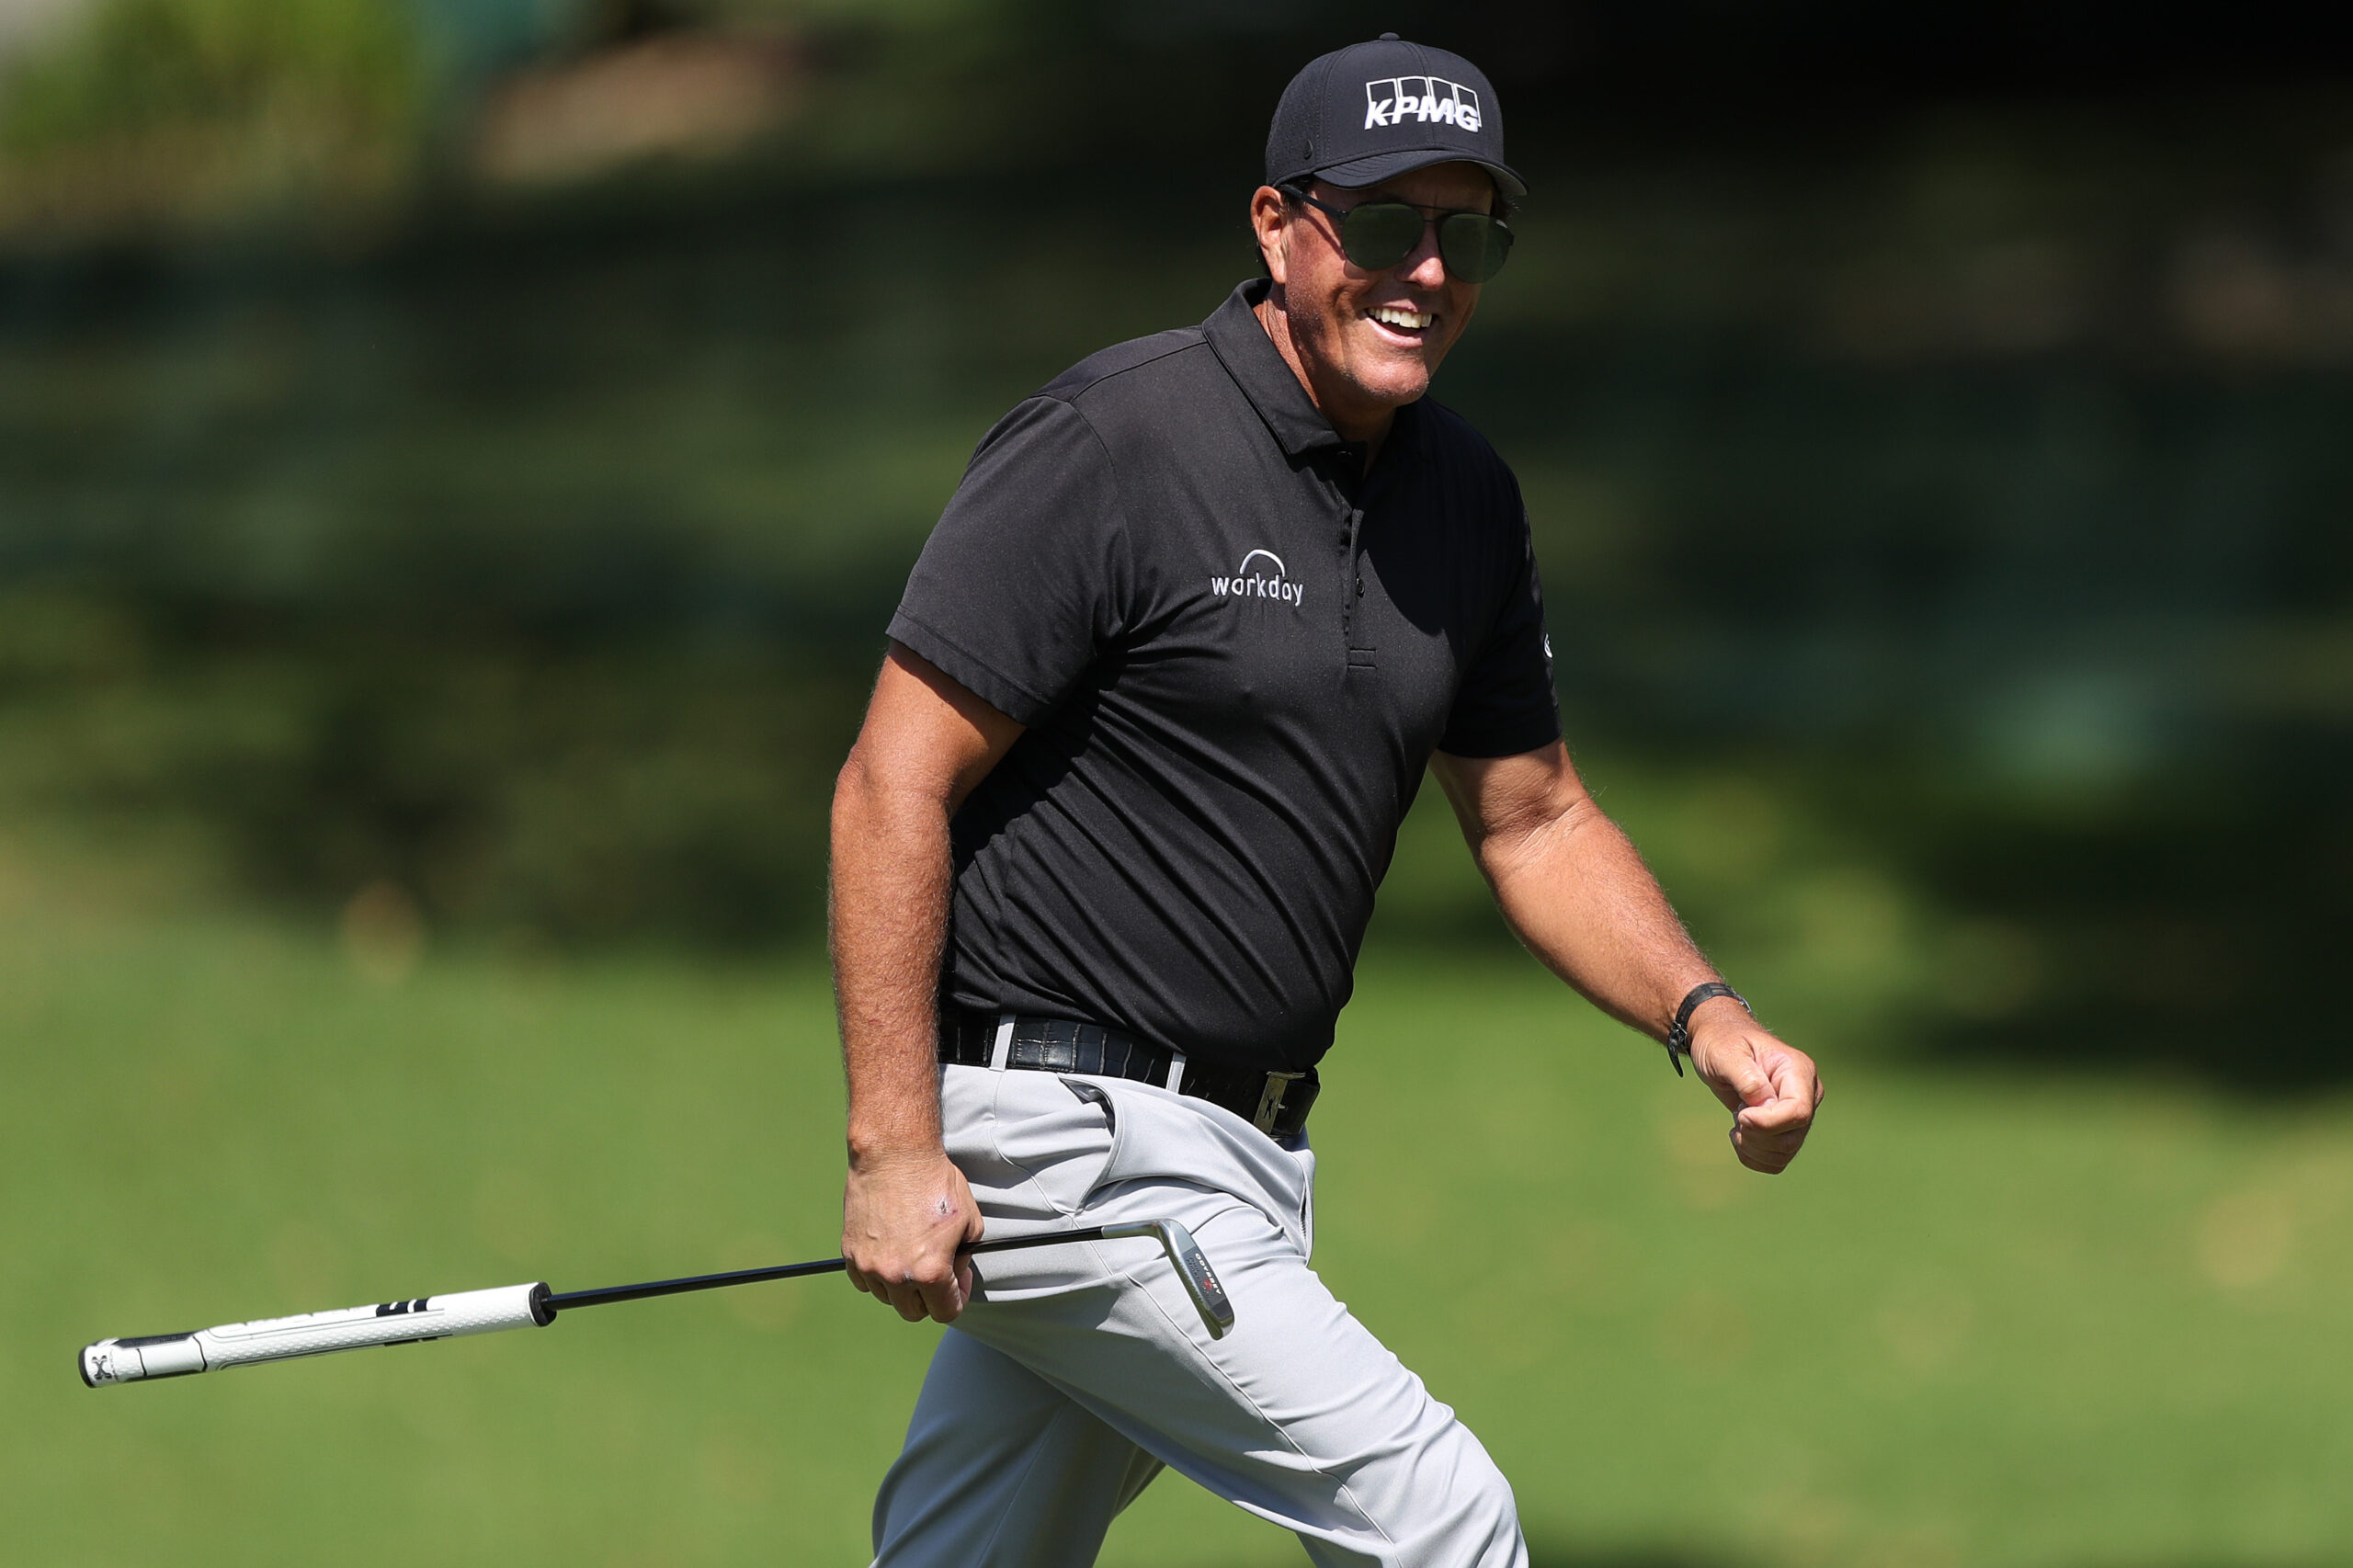 Woods, Mickelson Most Popular Golfers on